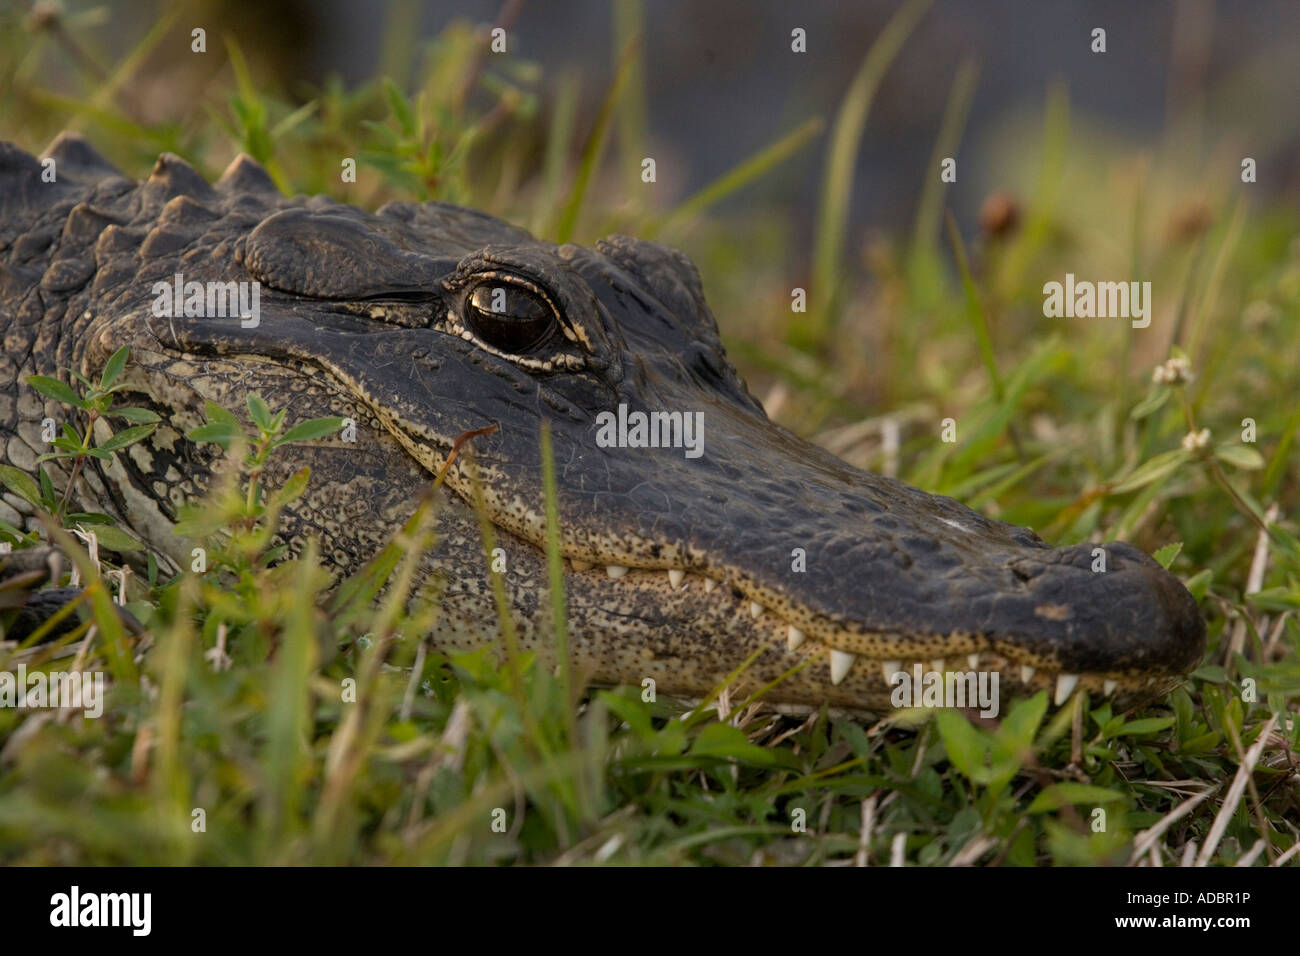 Ceramic alligator hi-res stock photography and images - Alamy